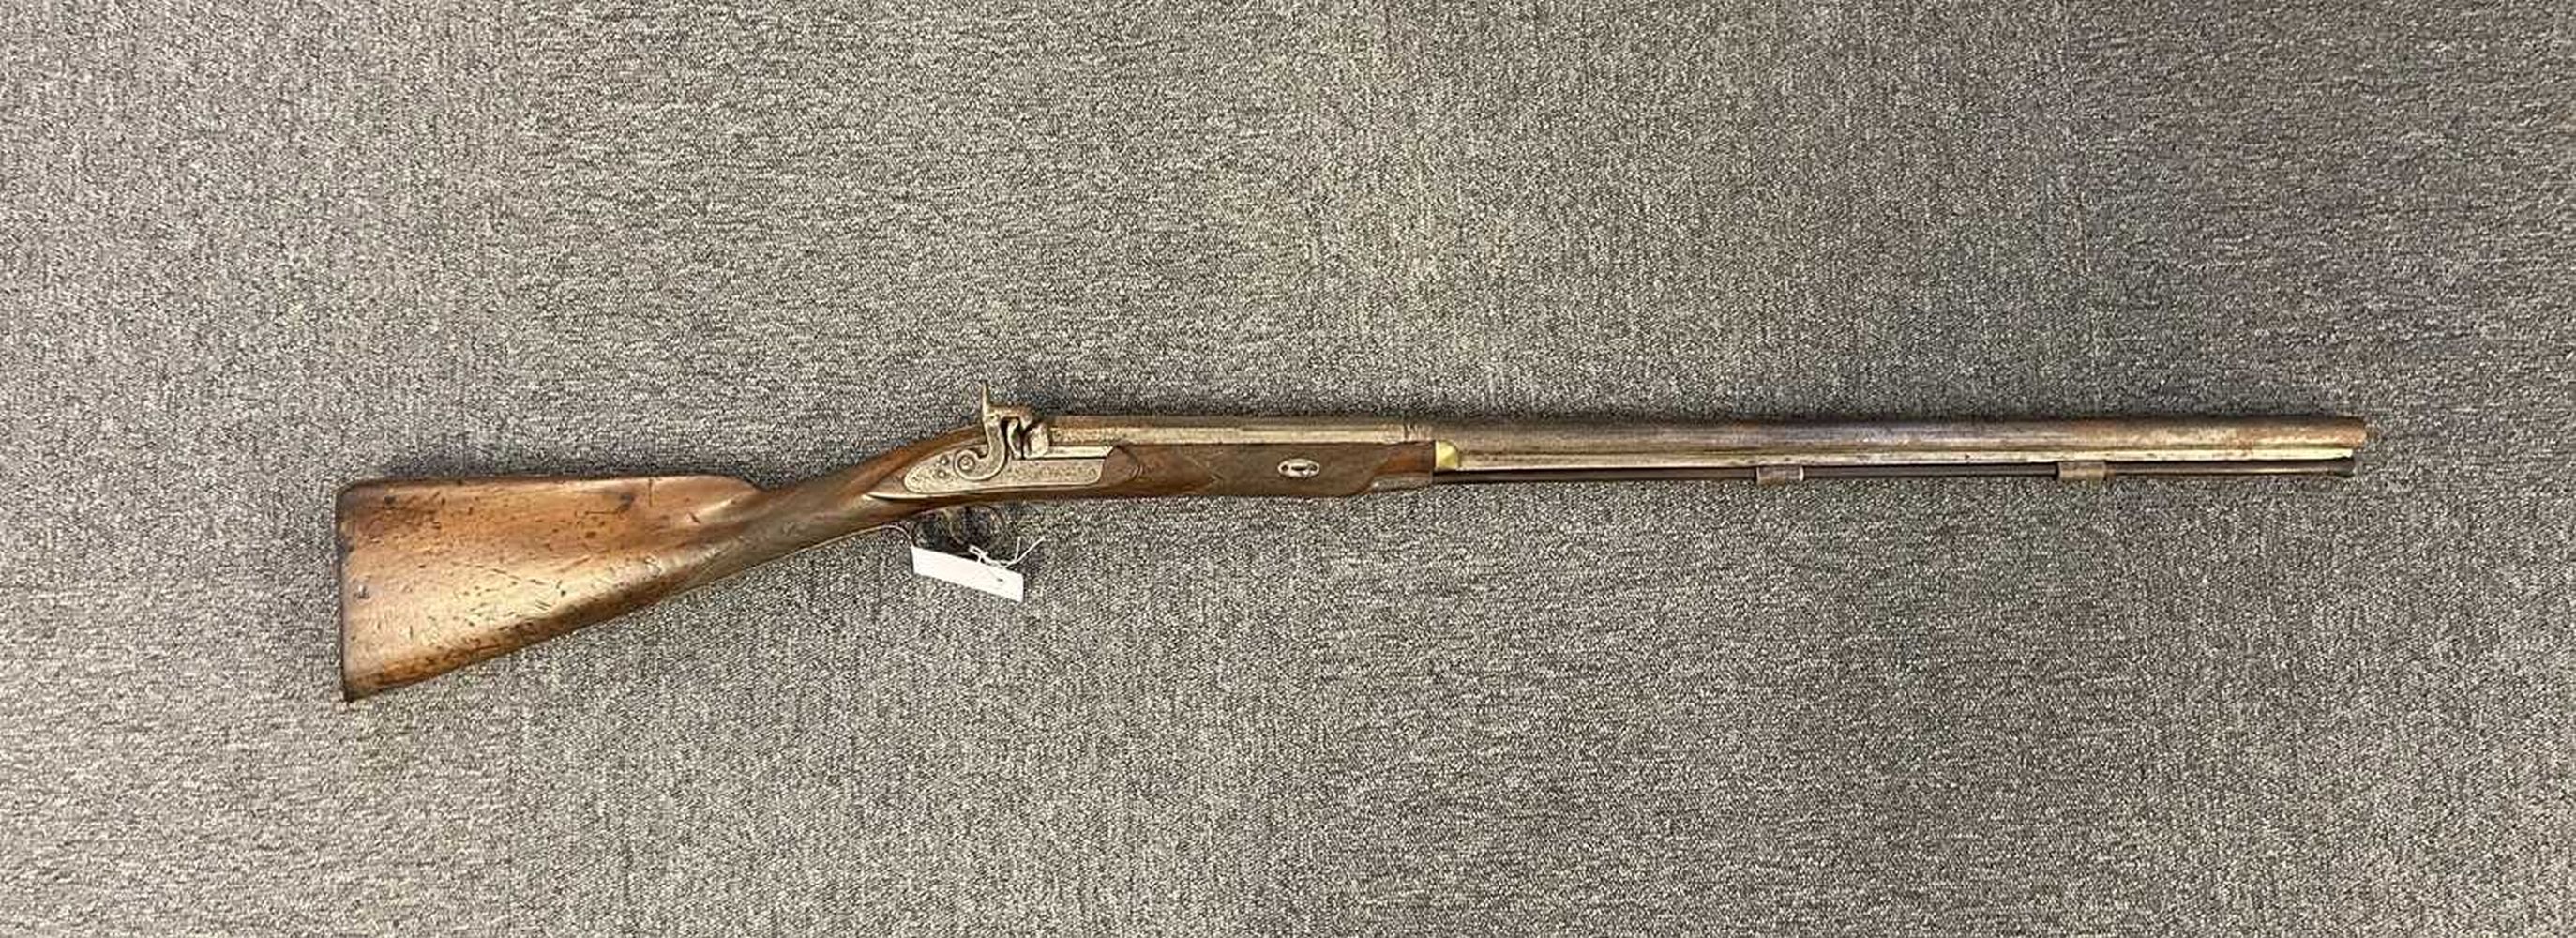 Sporting Rifle. A Victorian percussion sporting rifle